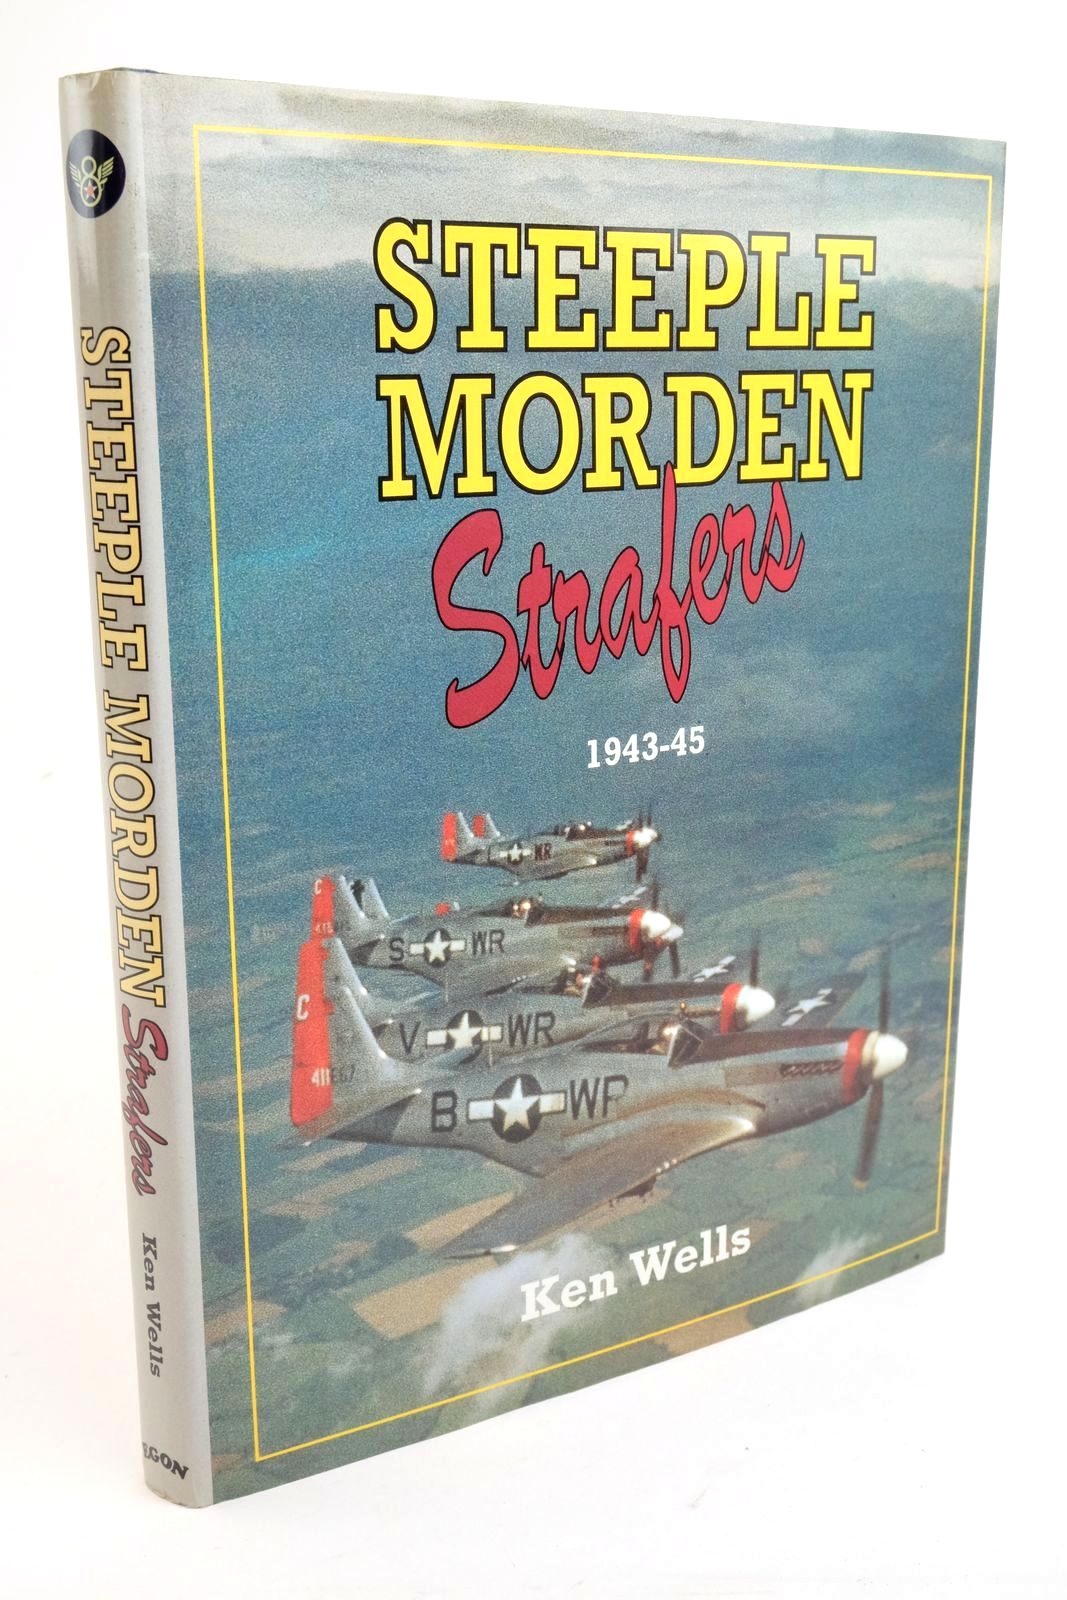 Photo of STEEPLE MORDEN STRAFERS 1943-45 written by Wells, Ken published by Egon Publishers (STOCK CODE: 1322194)  for sale by Stella & Rose's Books